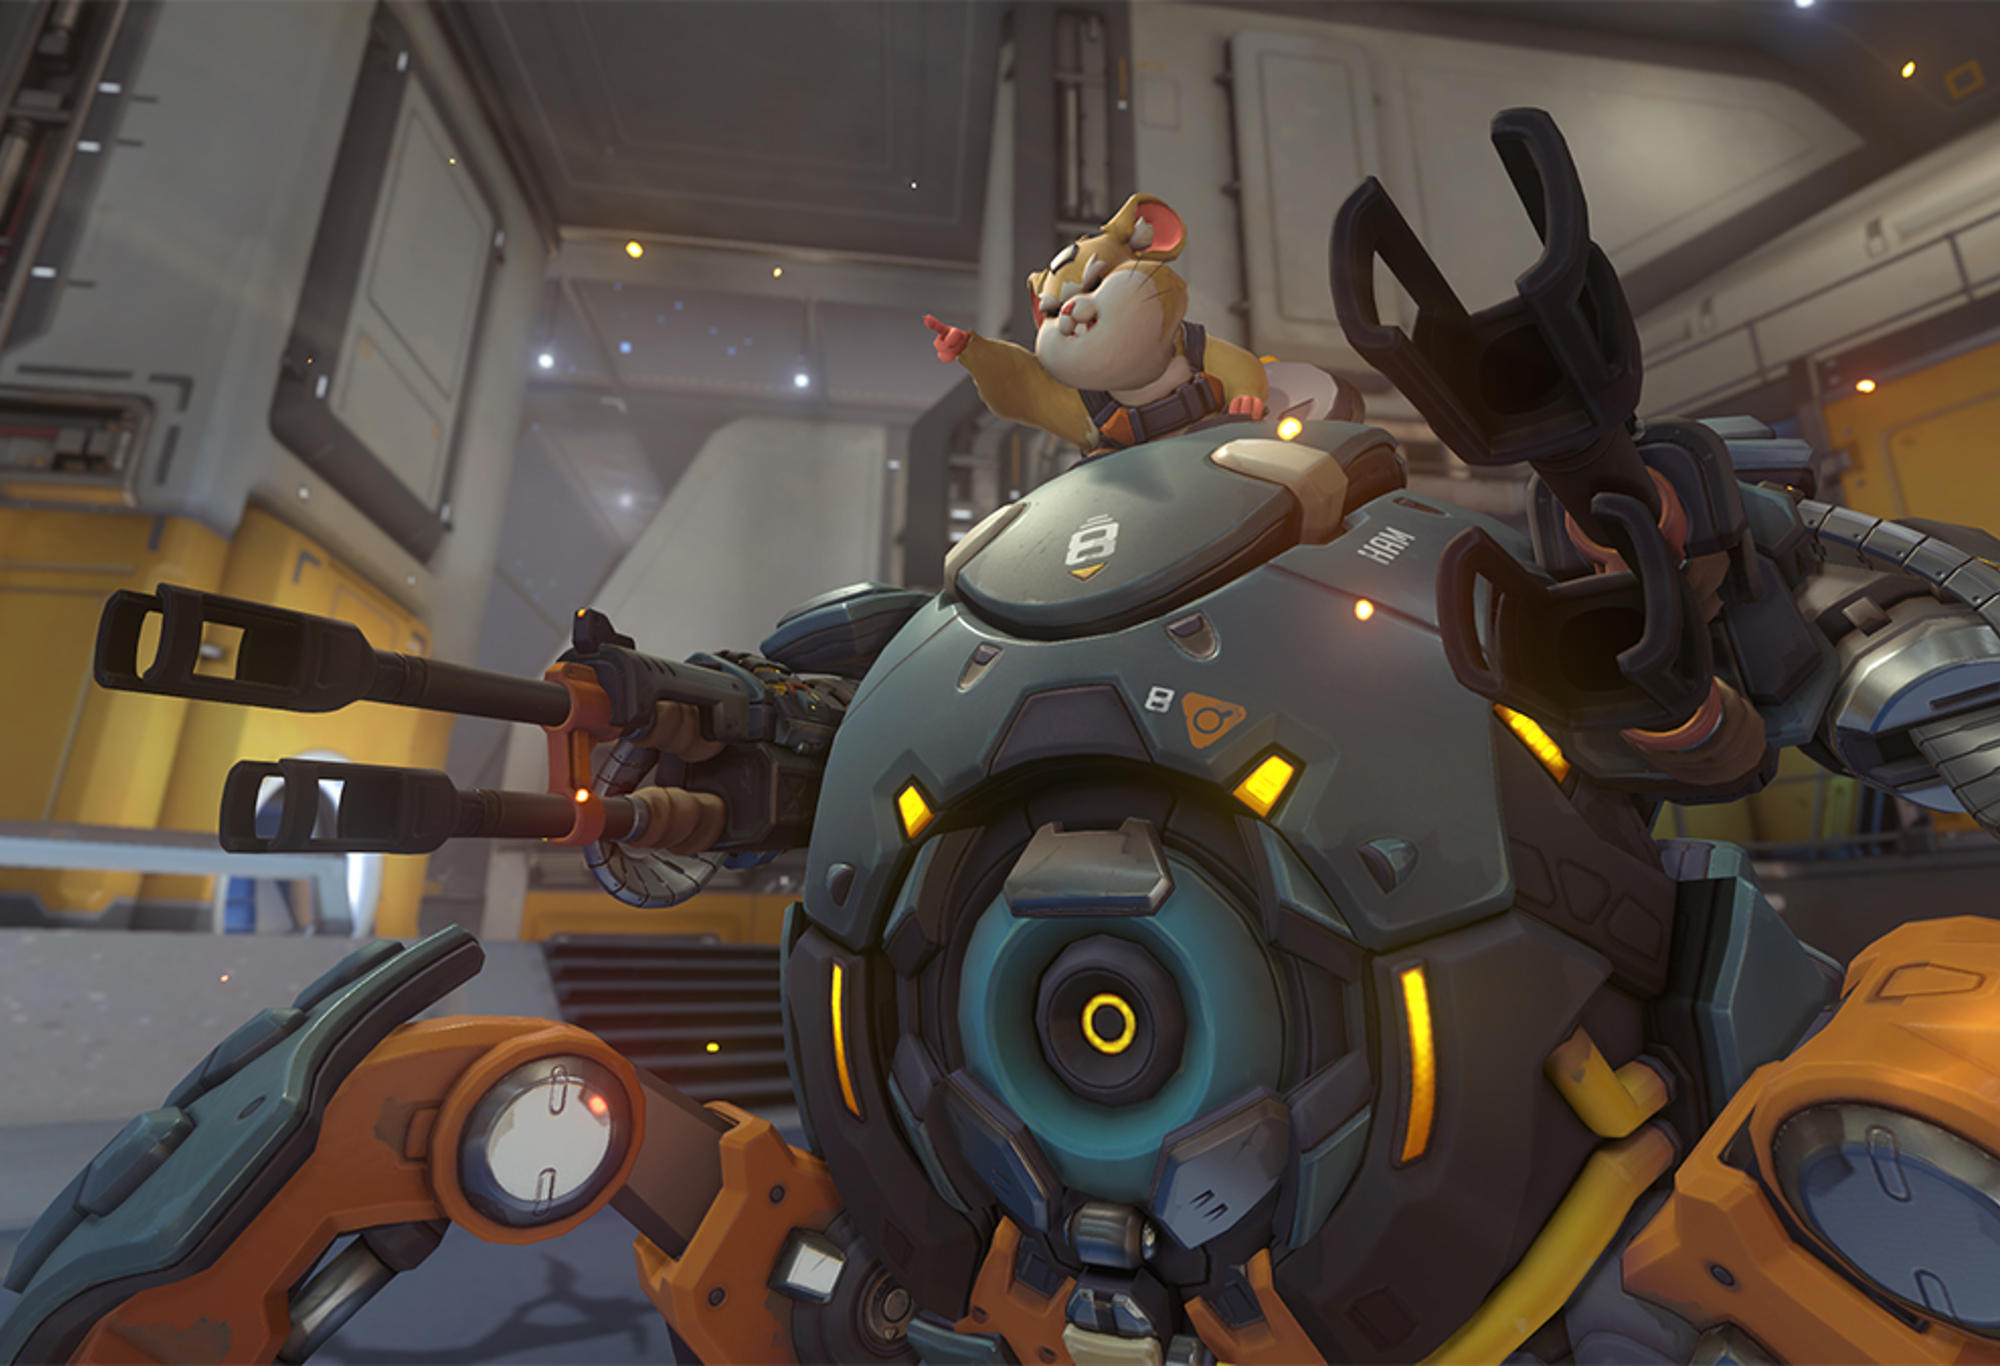 Overwatch character Wrecking Ball, also known as Hammond